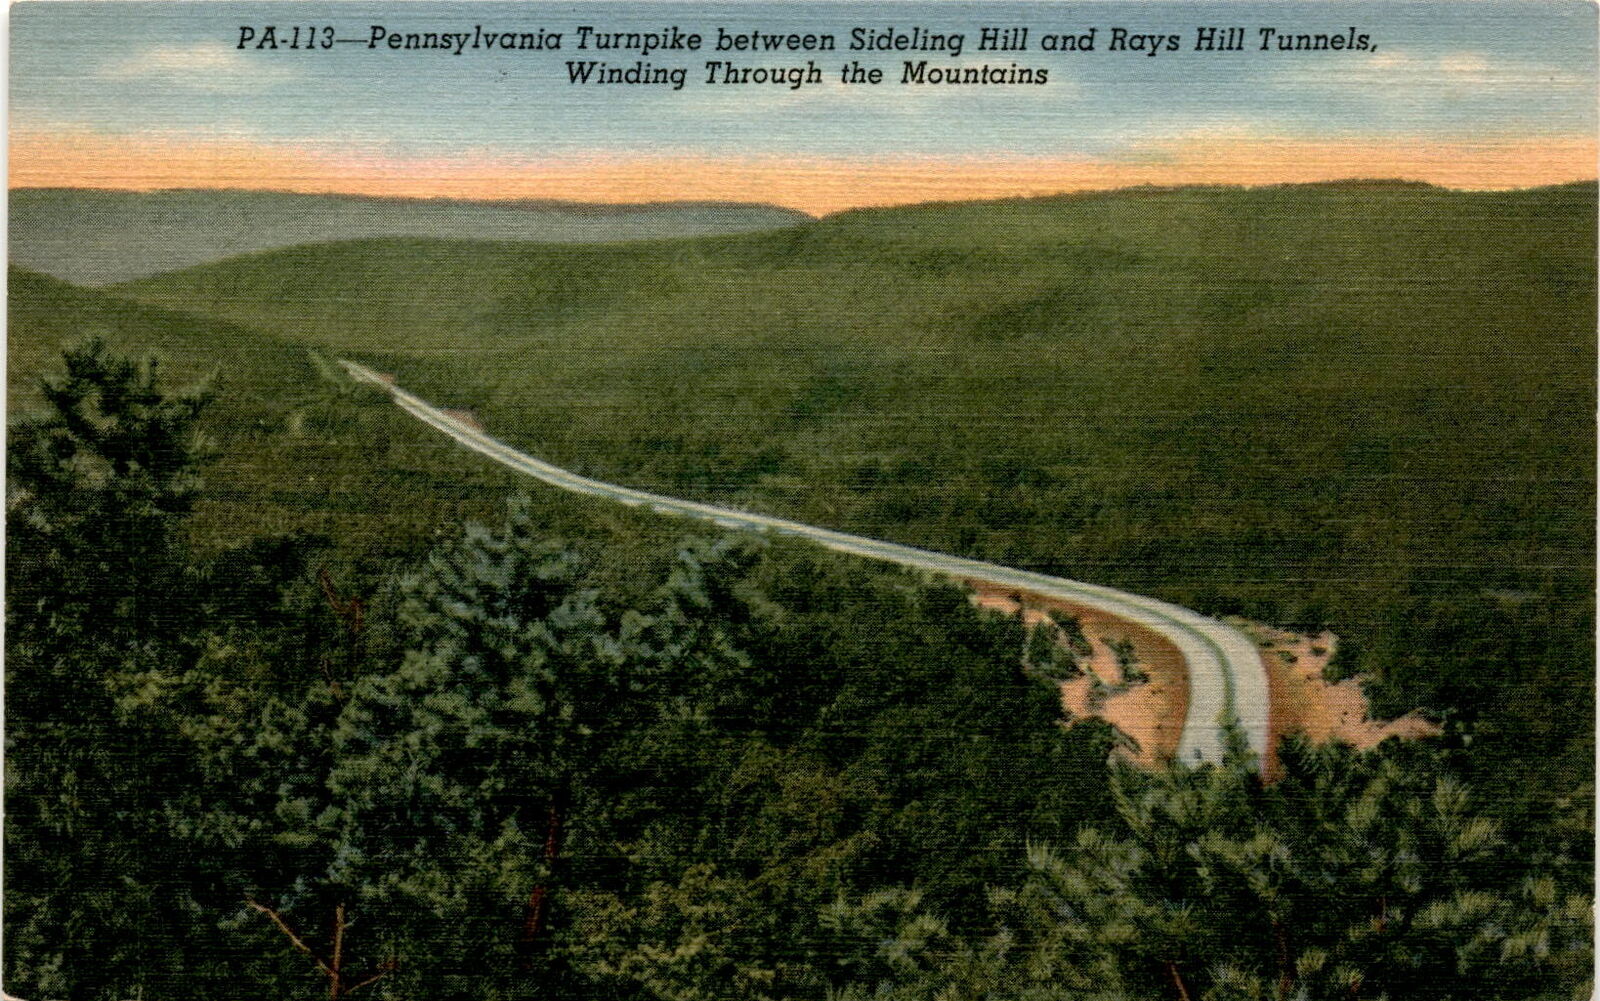 Pennsylvania Turnpike, Sideling Hill Tunnel, Rays Hill Tunnel, Burnt Postcard